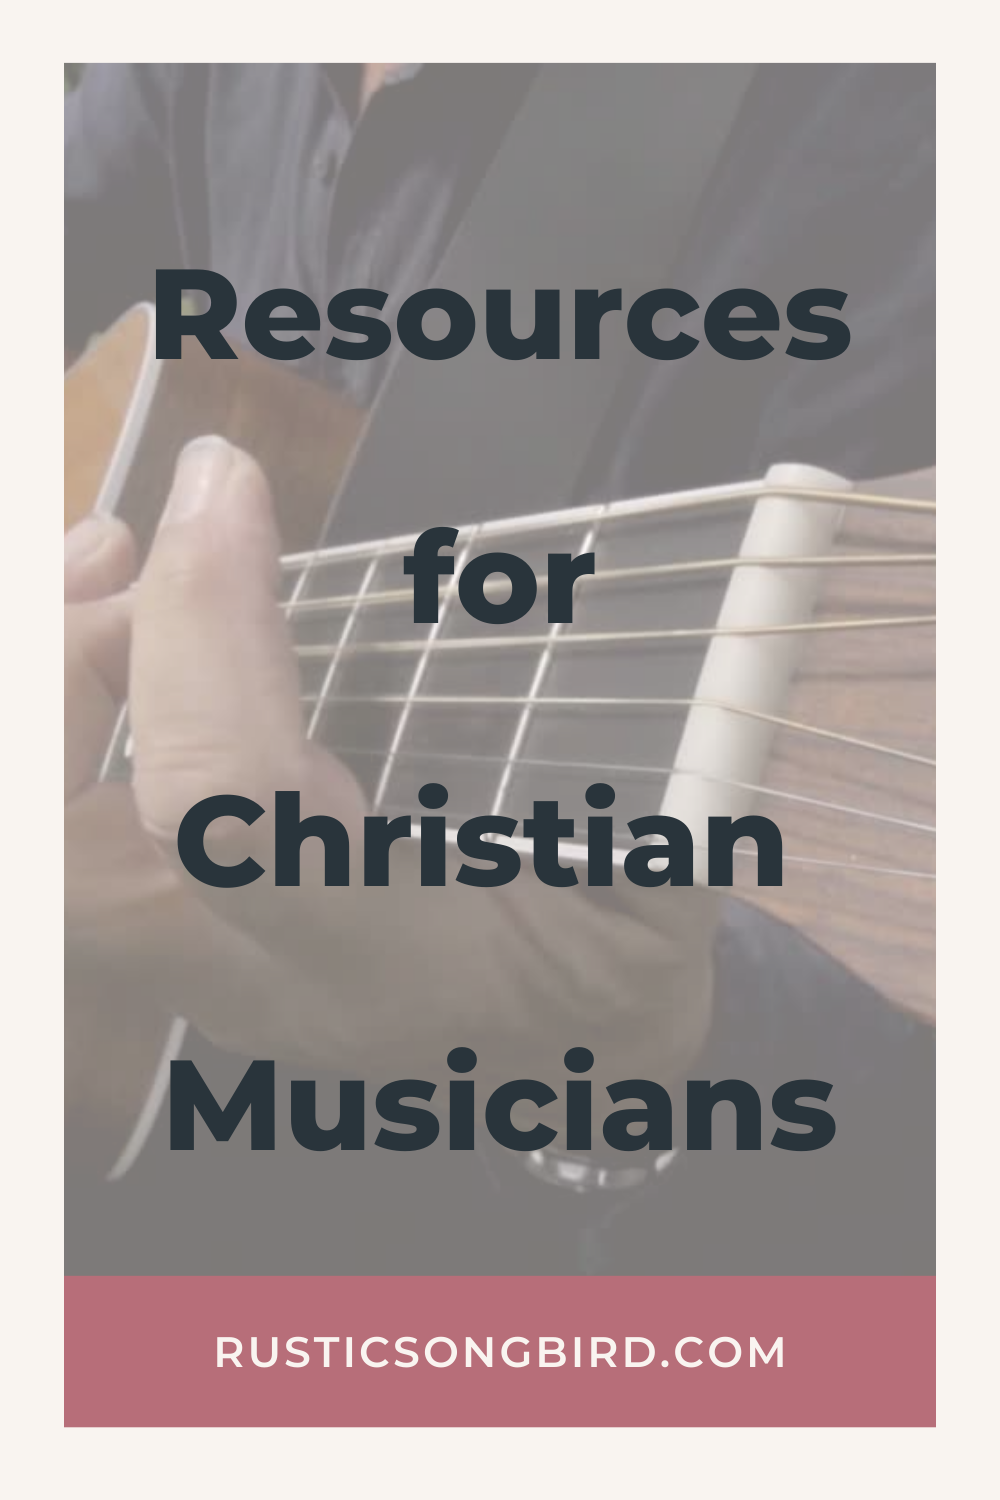 picture of man's hands playing guitar with text of the title of the blog post called "resources for christian musicians"